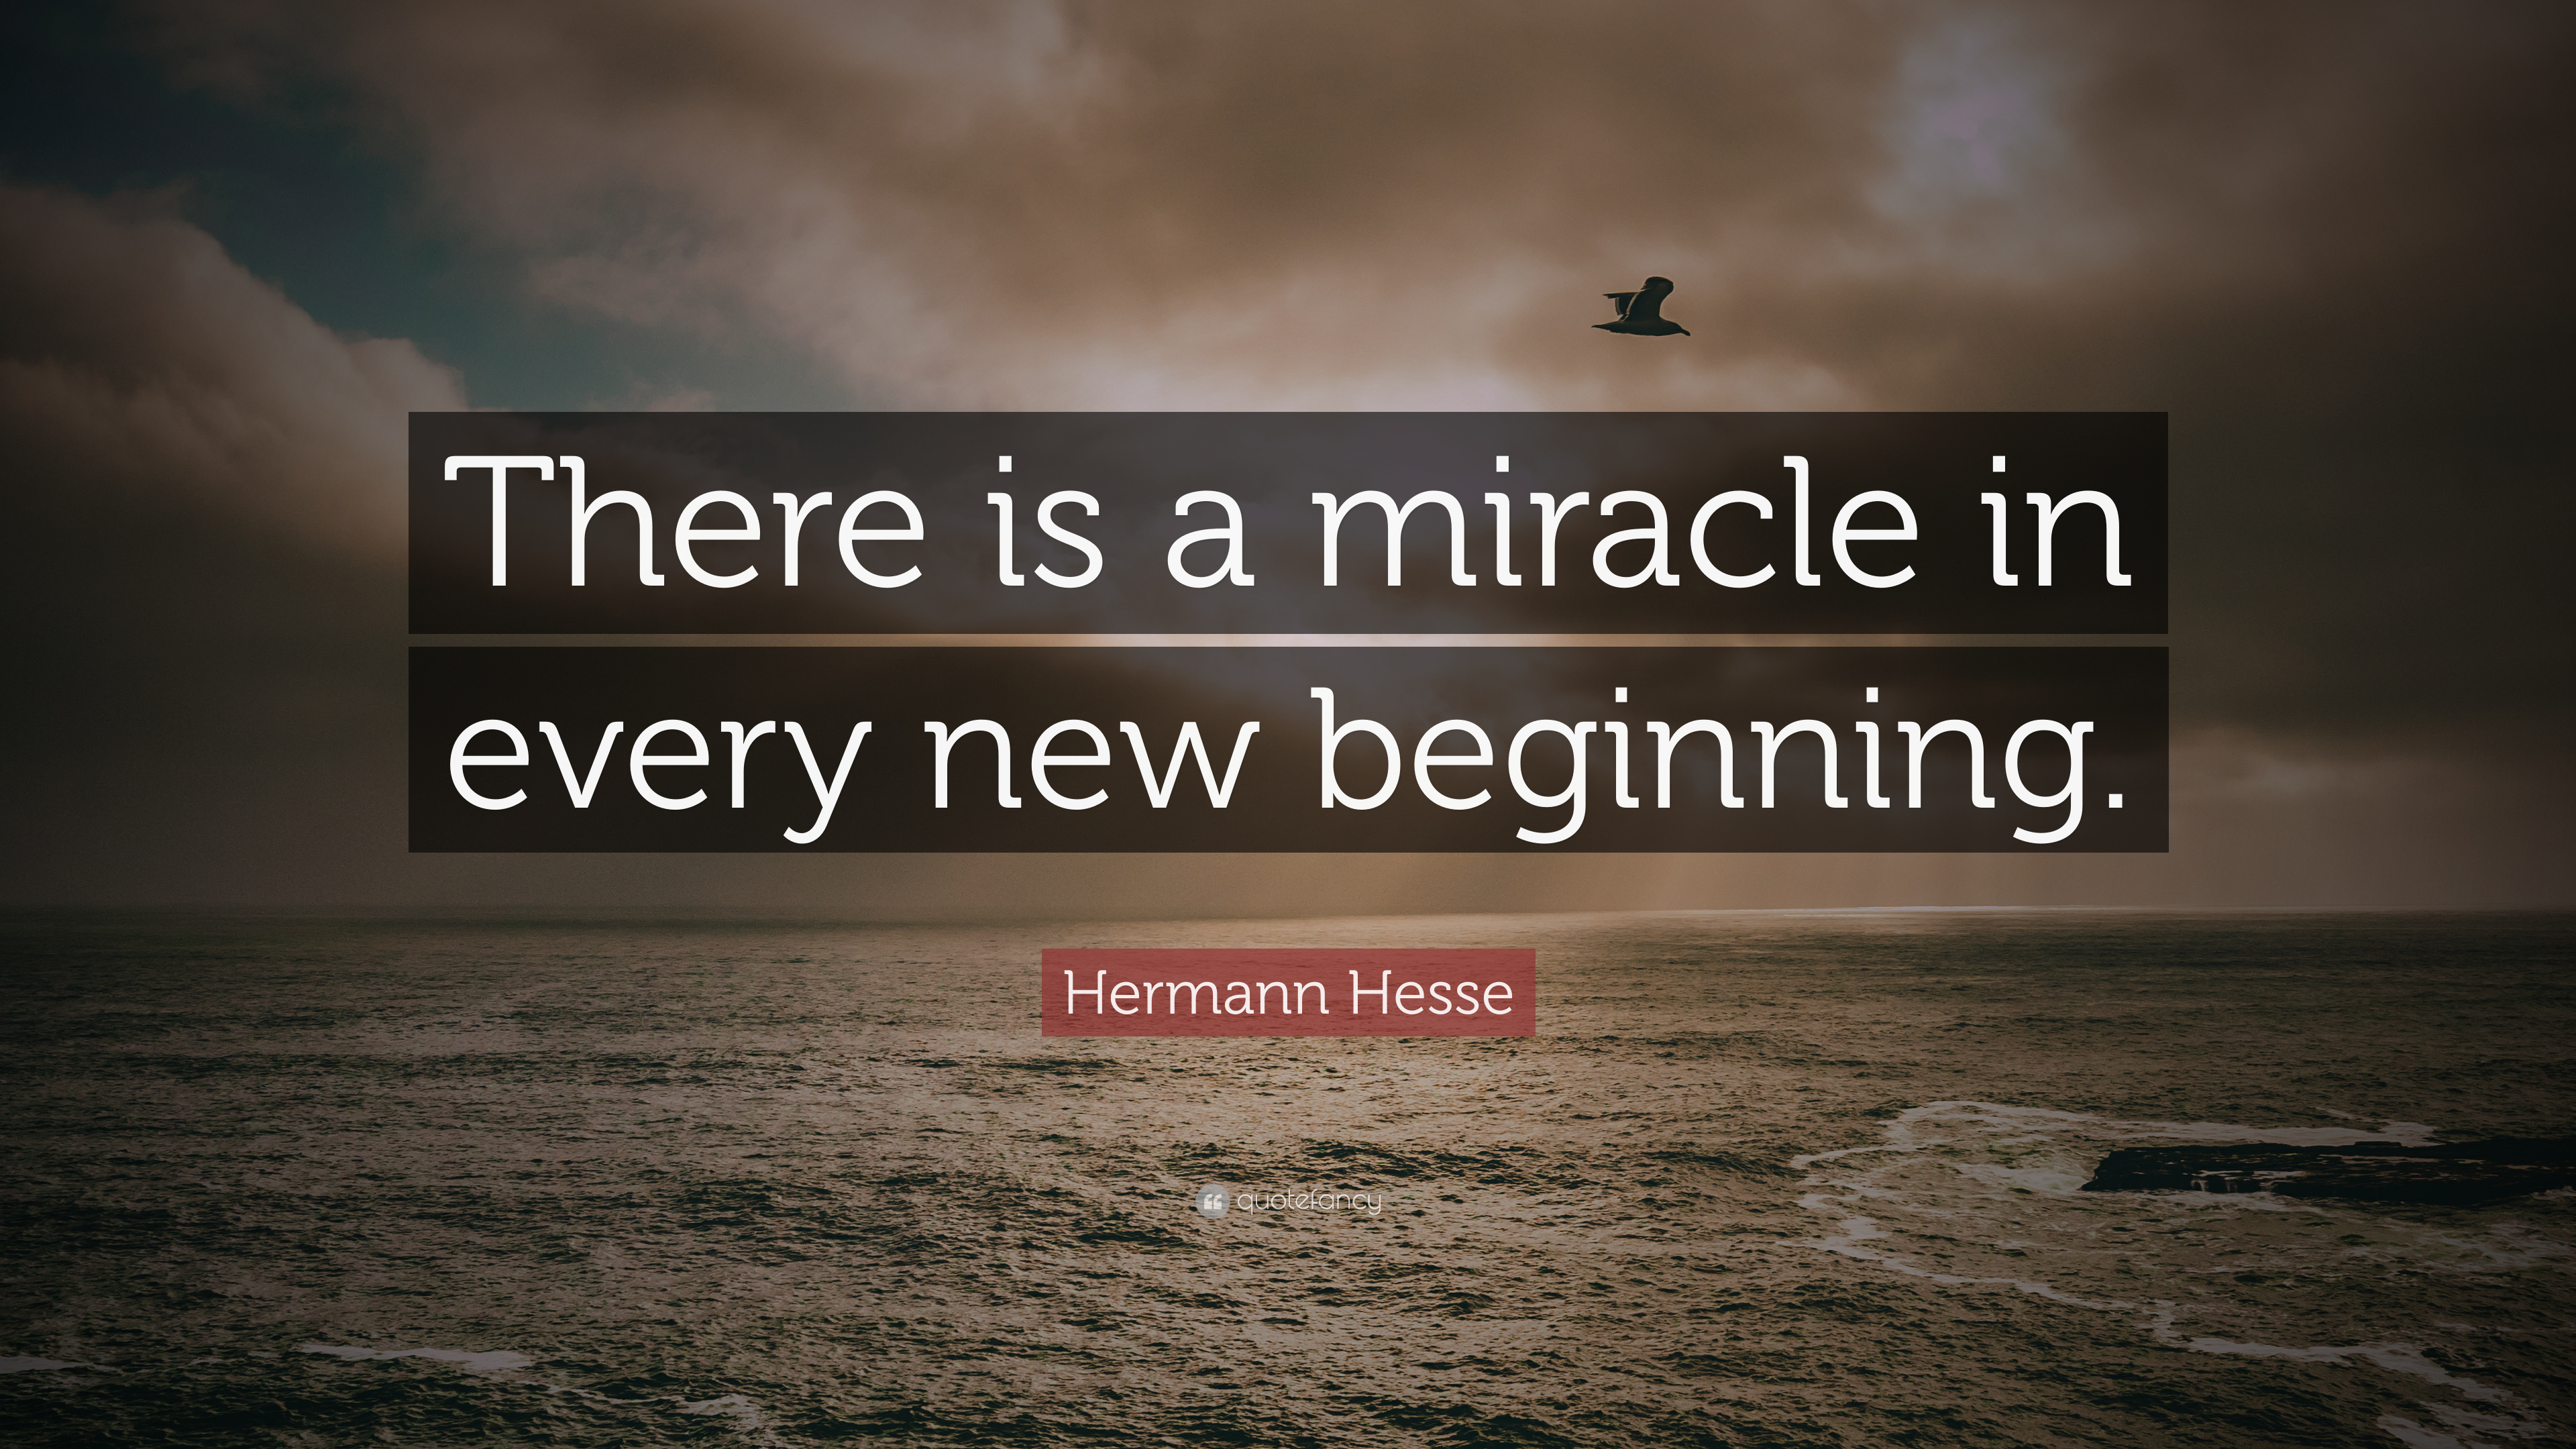 Hermann Hesse Quote: “There is a miracle in every new beginning.”